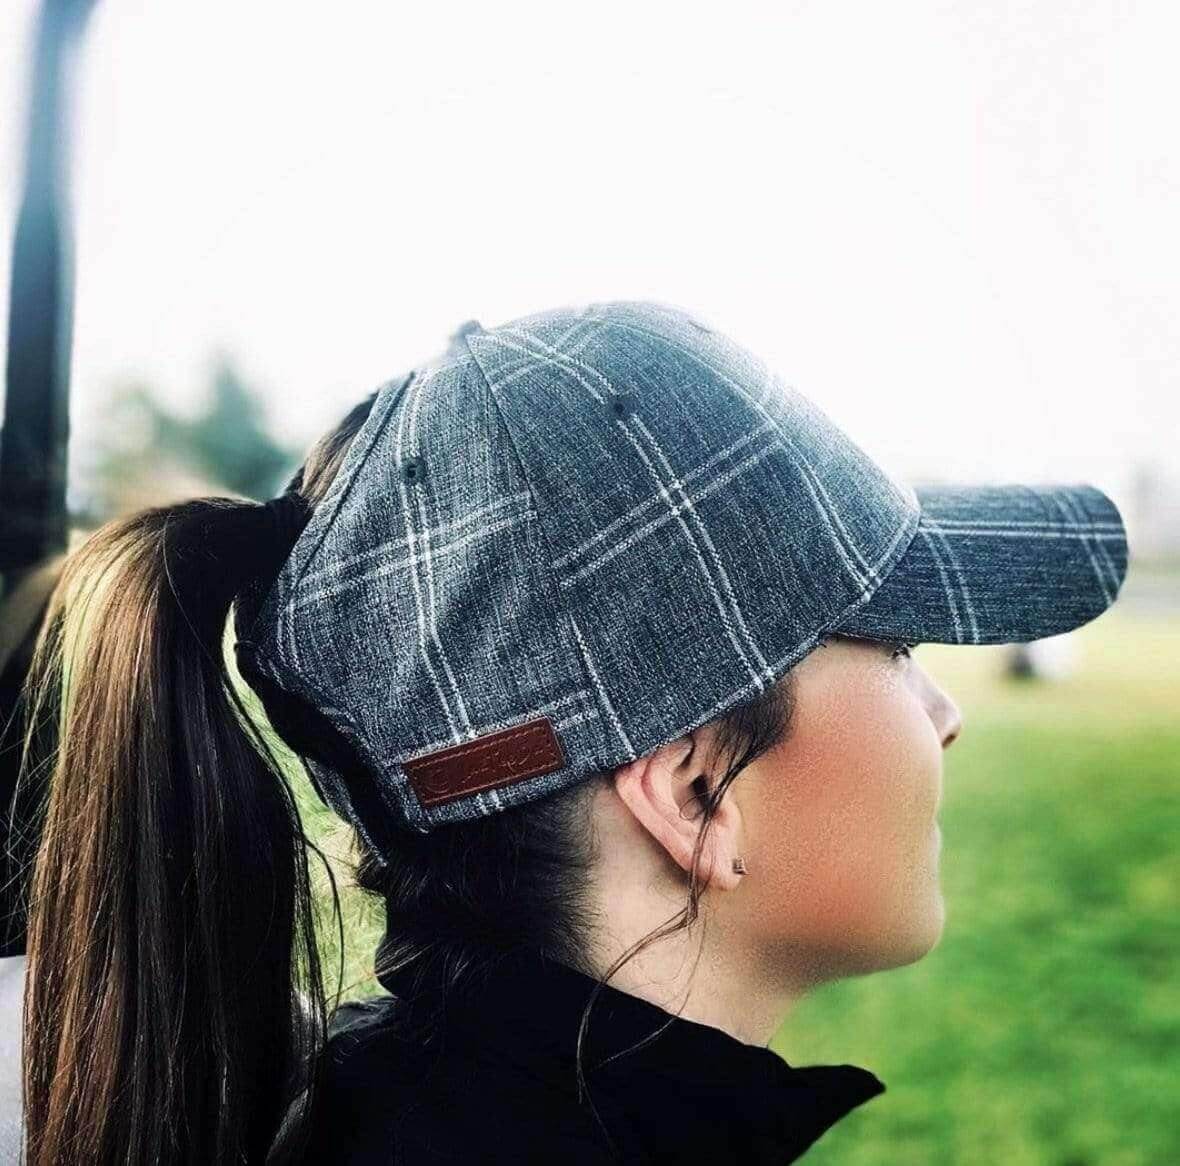 Best Women’s Pony Tail Golf Hat - Grey and White Plaid, Velcro Adjustable Fit